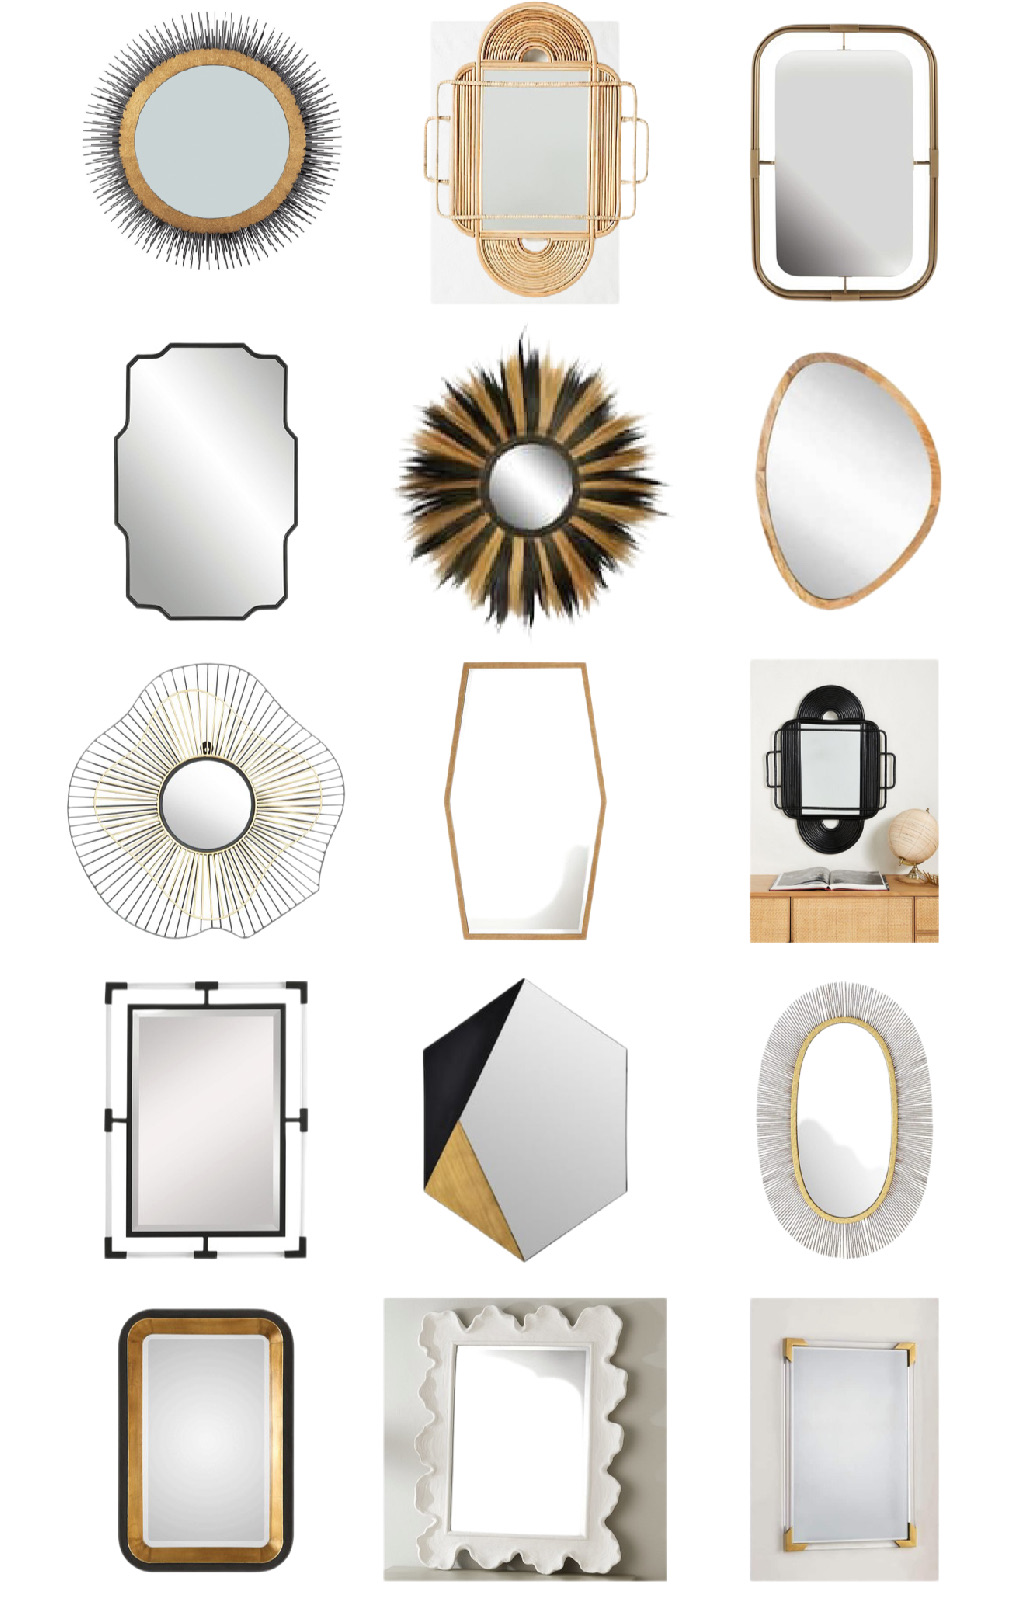 15 Unique Wall Mirrors - This is our Bliss